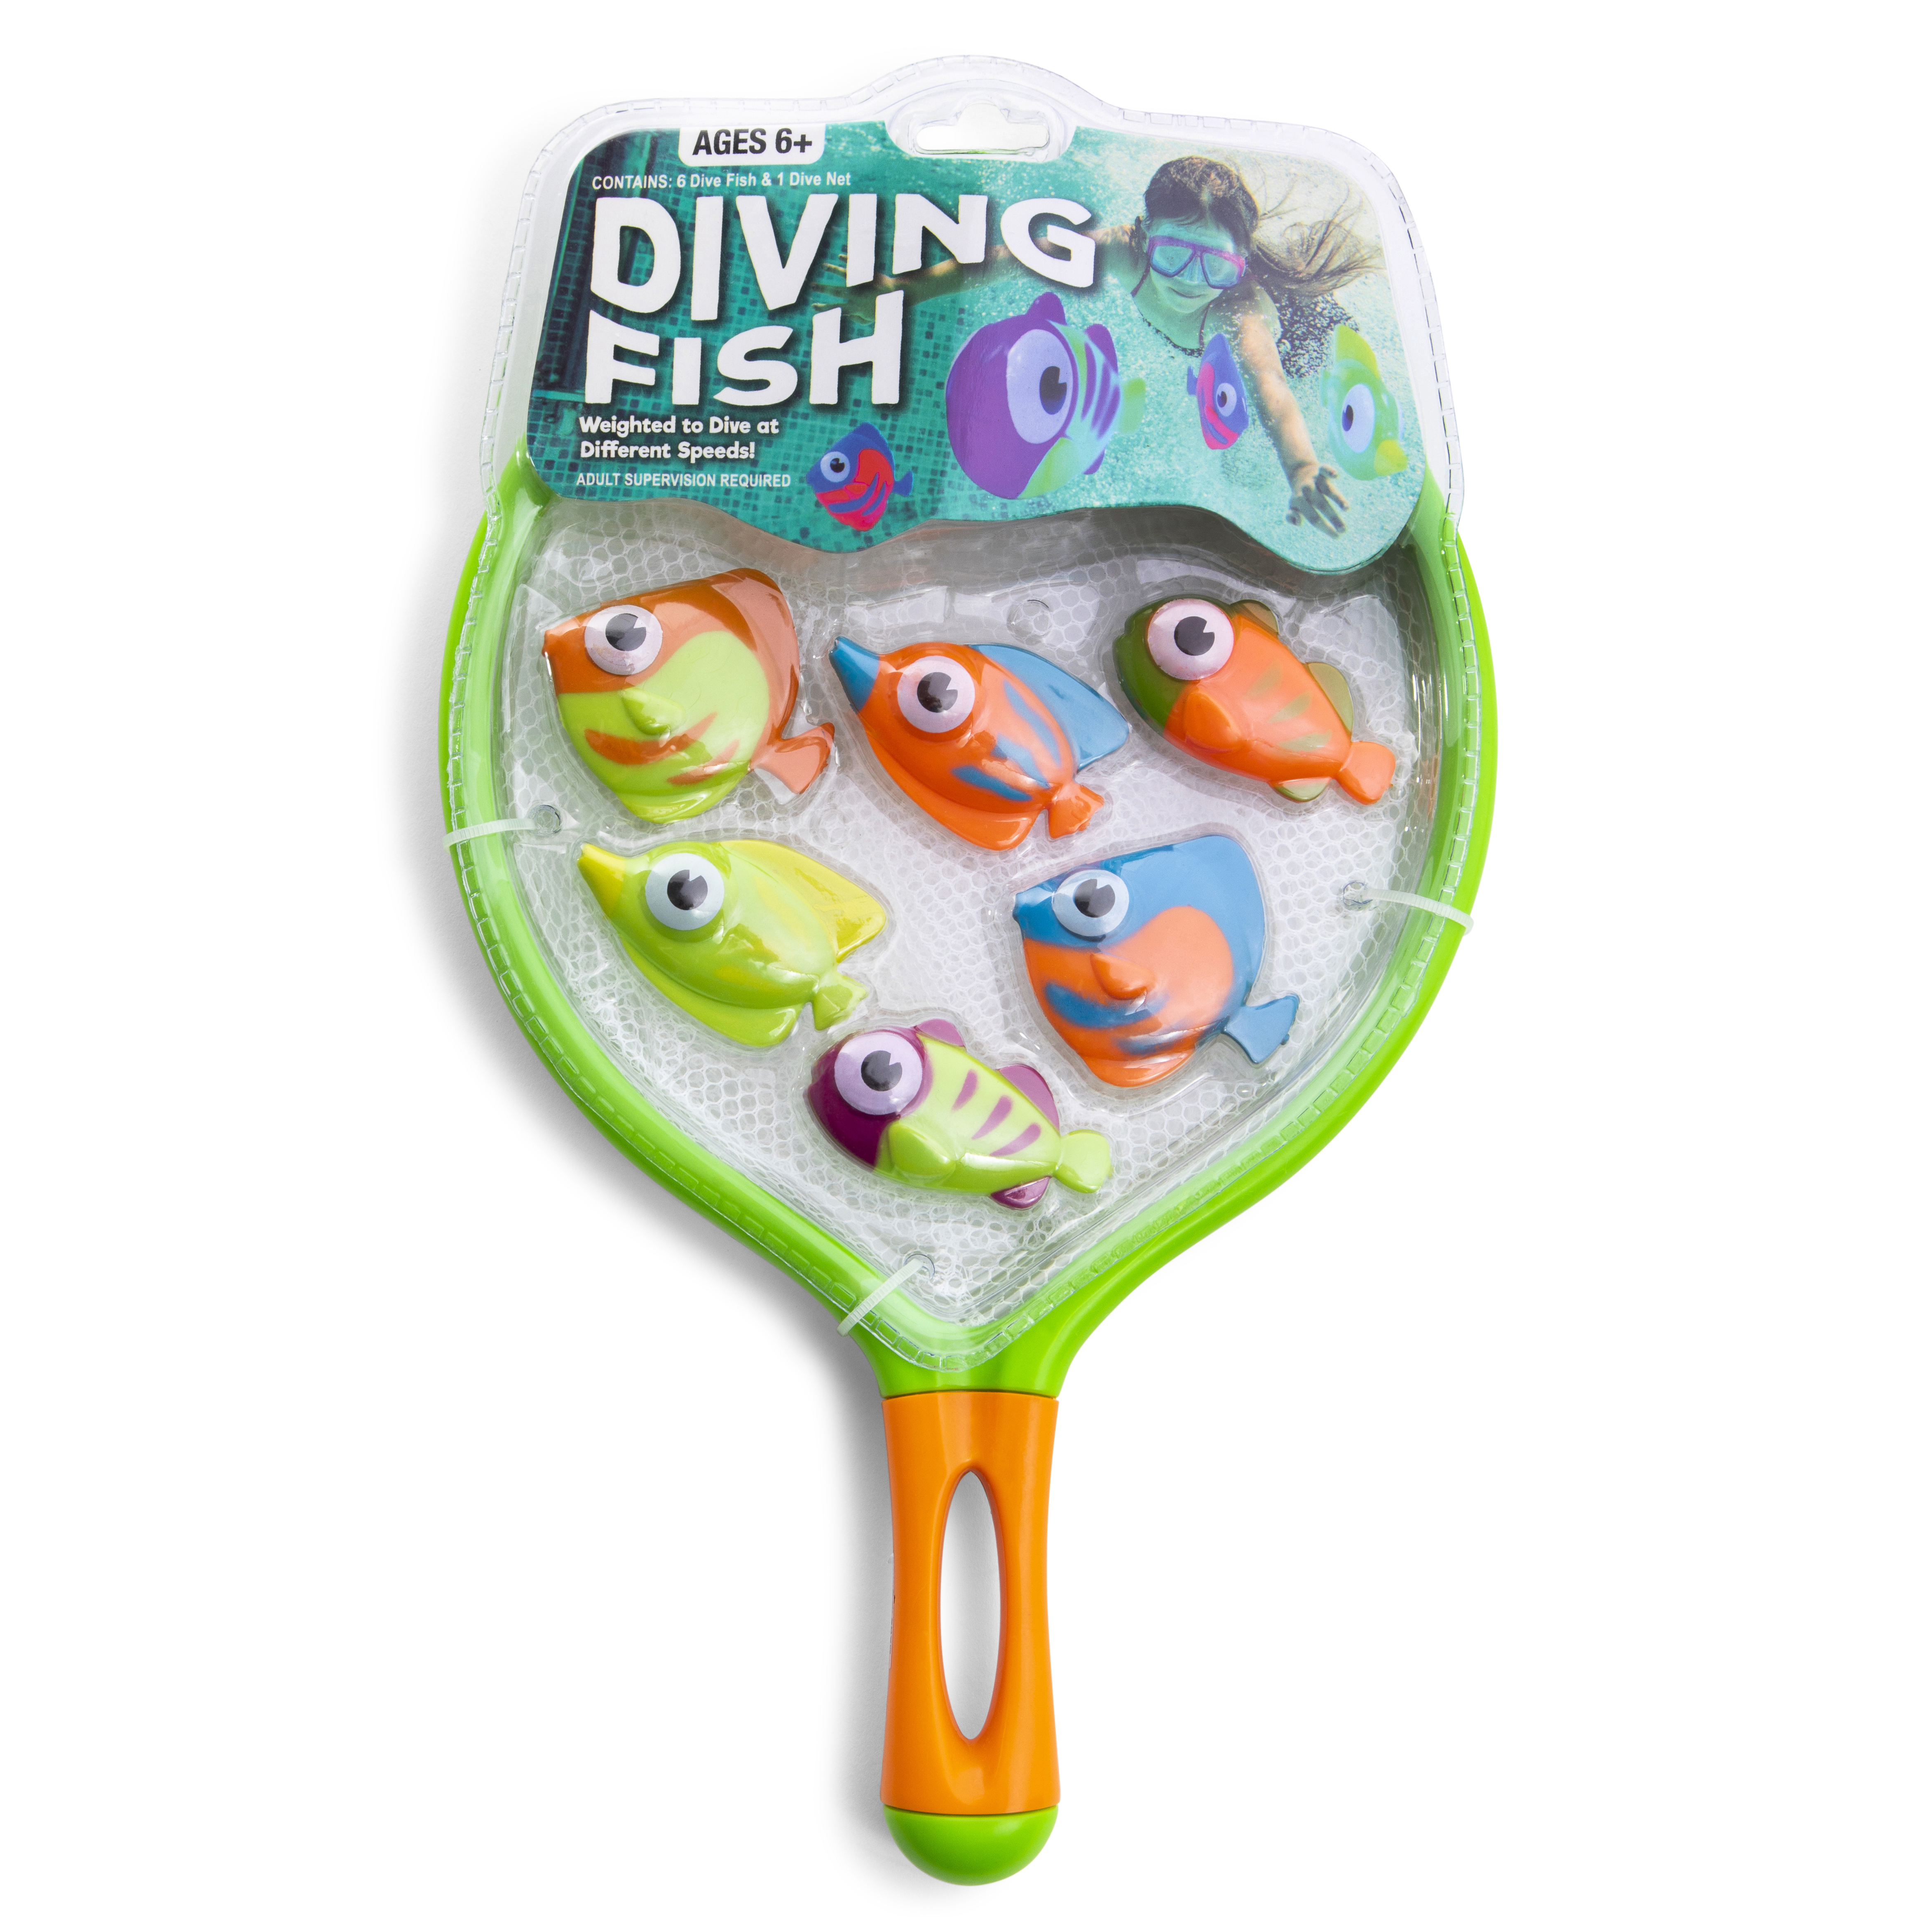 pool game, summer, water, water toy, kid pool, pool float, vacation,  vacation toys, swimming, swim game;diving game;pool game for kids;kids pool  game;beach game;beach toy;pool toy;diving fish;fishing net;cheap toys for  kids;fishing game;pool fishing